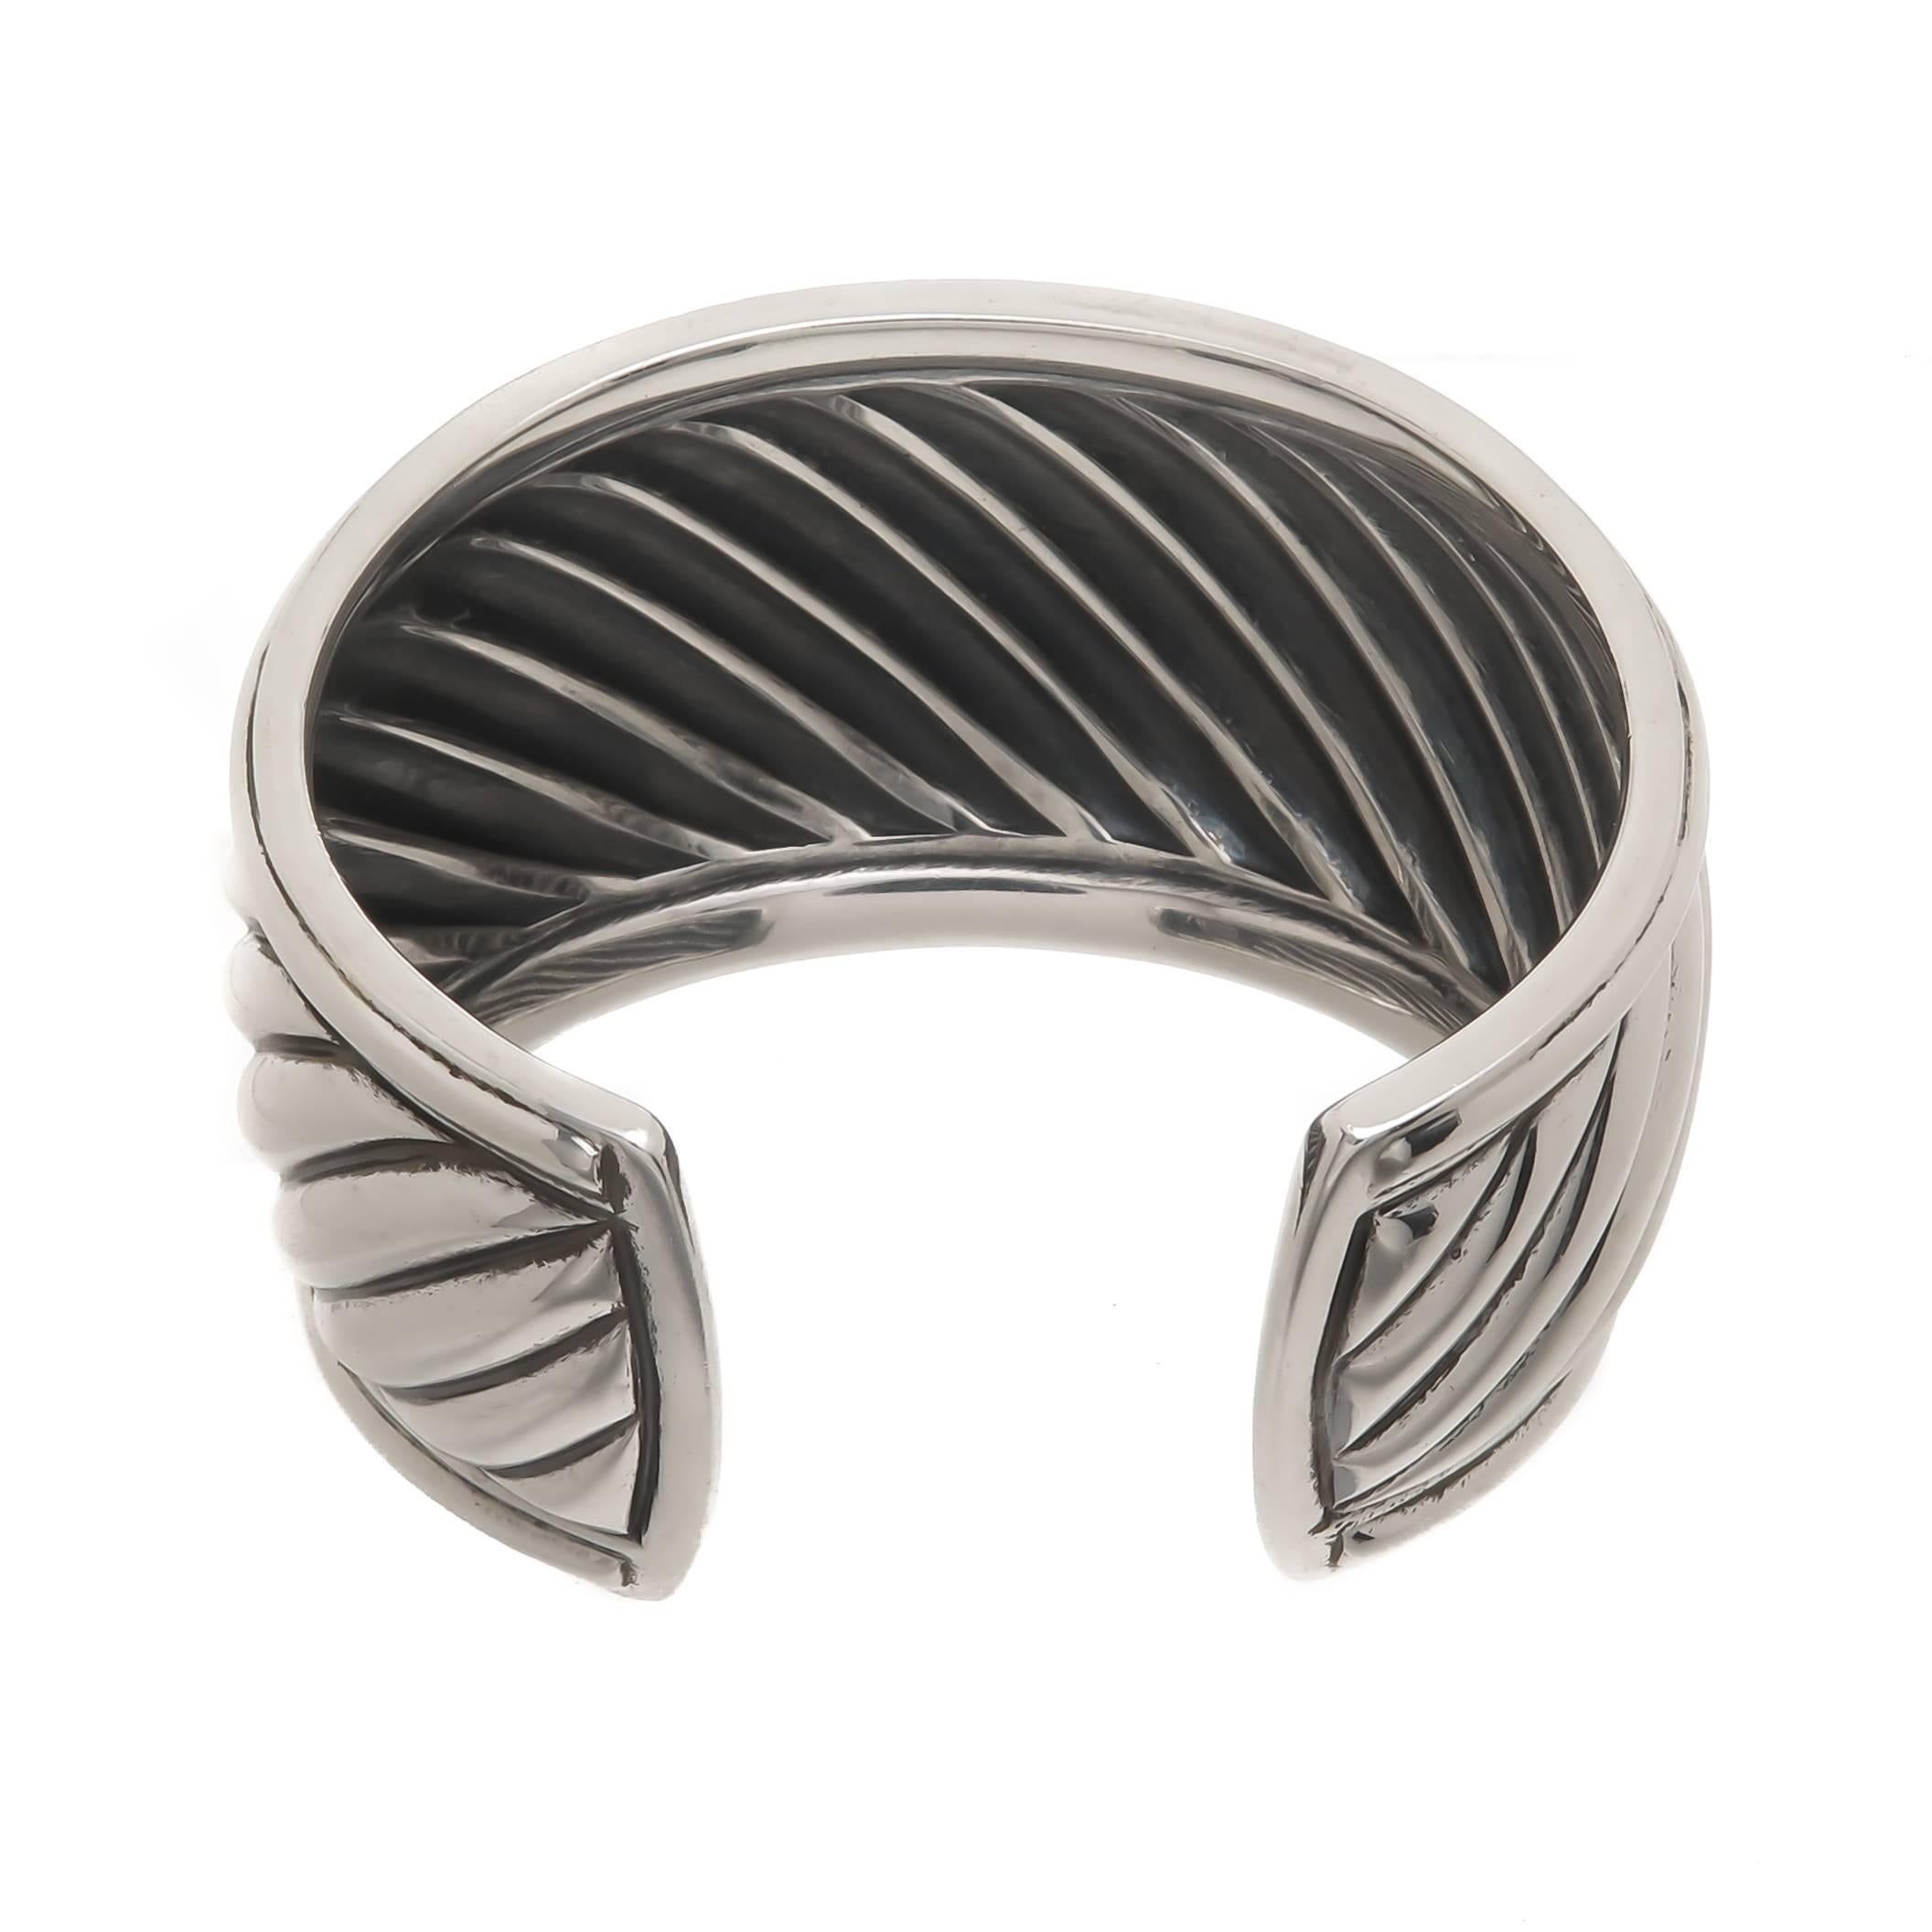 Circa 2010 David Yurman Sterling Silver Thoroughbred Cuff Bracelet, measuring 1 5/8 inch wide with the wrist opening measuring 1 inch wide. Set with 50 round Brilliant cut diamonds on either side of the cuff totaling .75 Carat. Comes in original